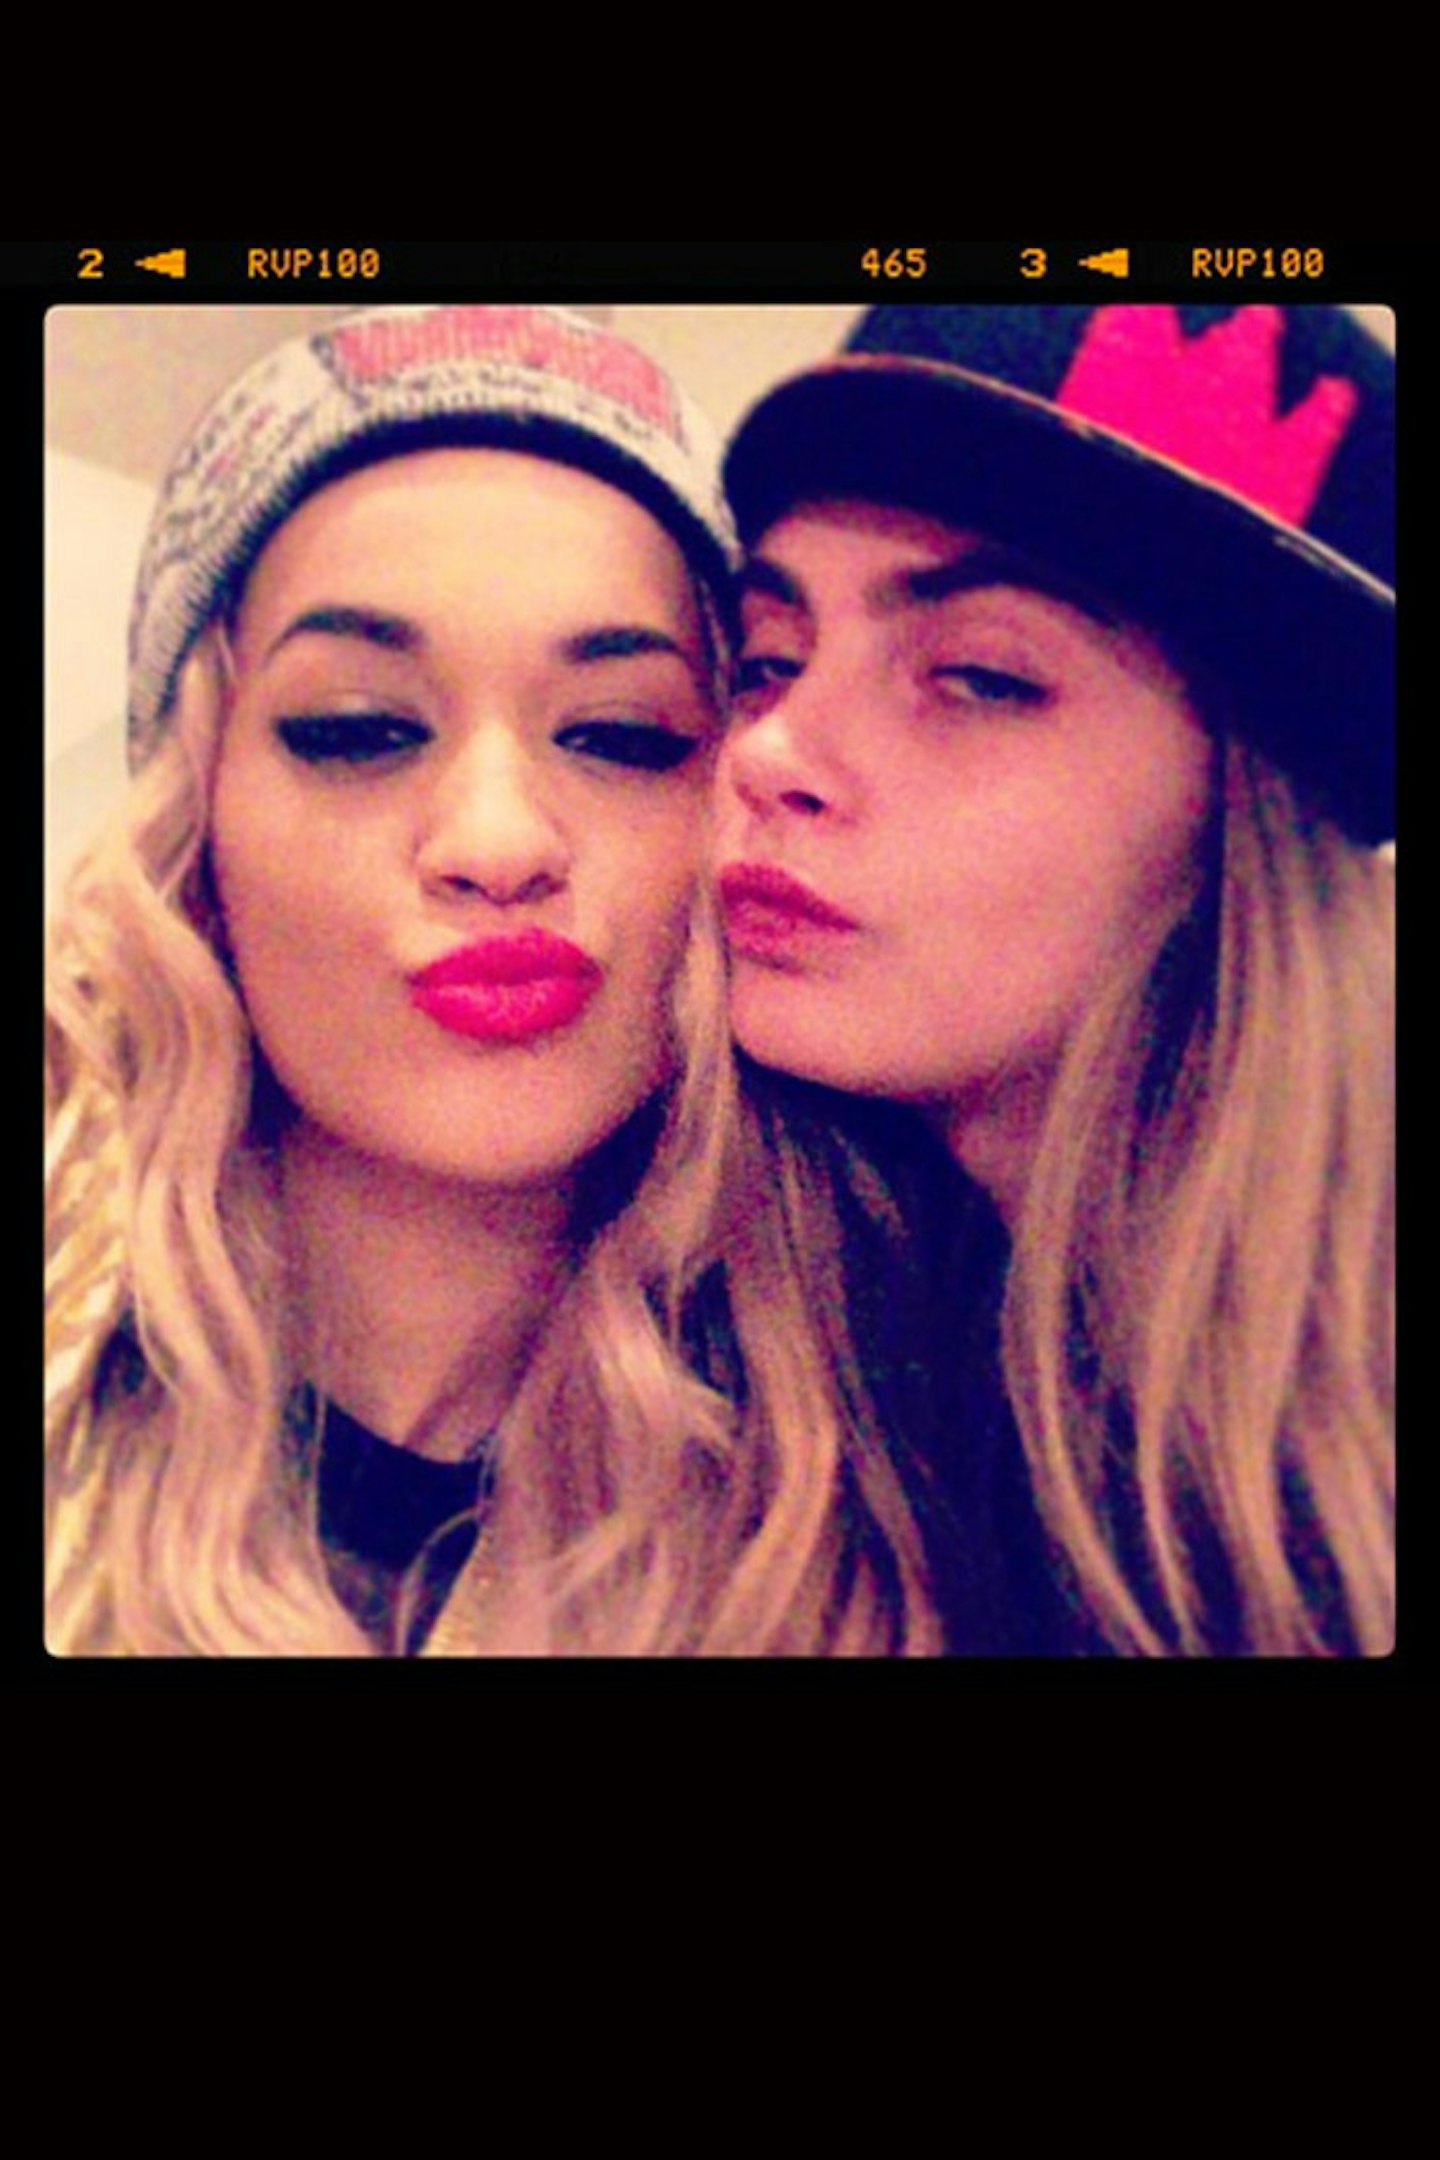 @RitaOra: 'We in this shit wifey style! @caradelevingne'